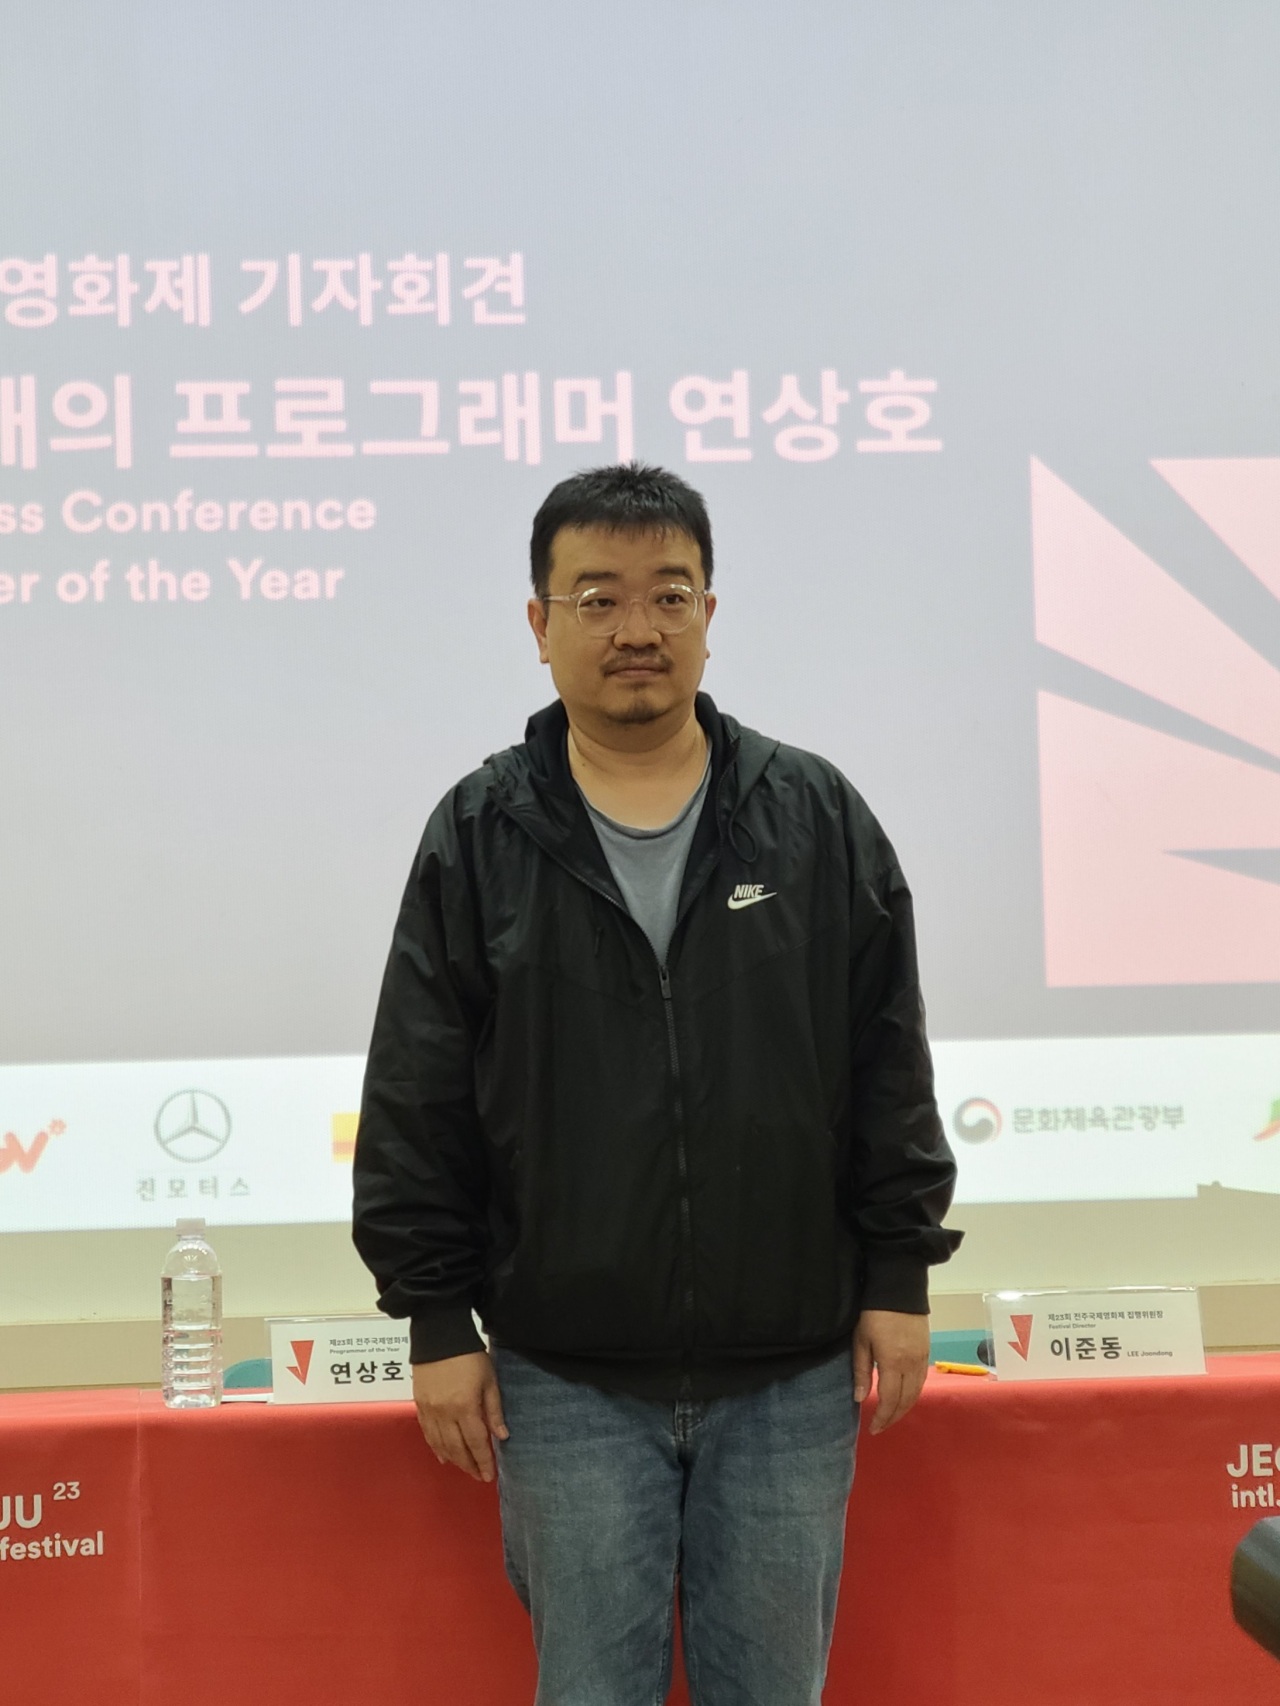 Director Yeon Sang-ho poses after a press conference for “J Special: Programmer of the Year” held at Jeonju Jungbu Vision Center in Jeonju, North Jeolla Province on Sunday (Song Seung-hyun/The Korea Herald)